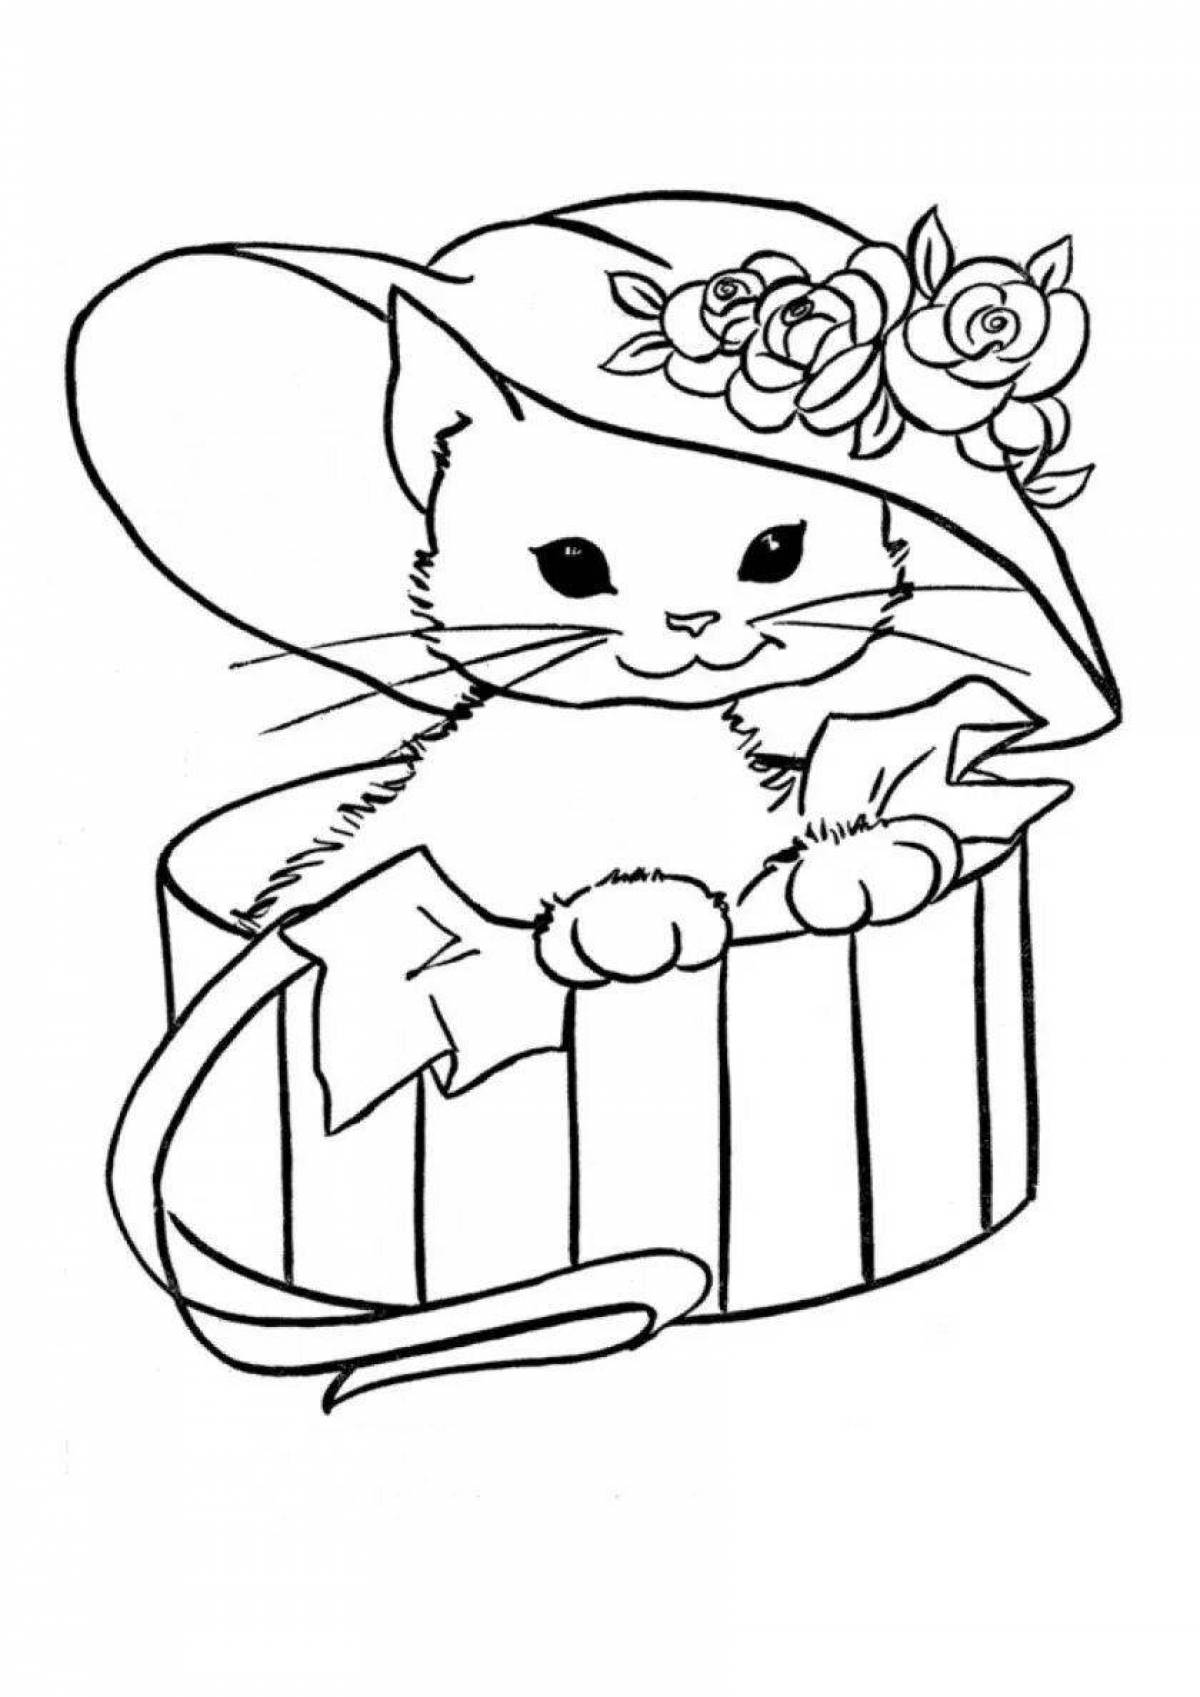 Loving kittens coloring book for children 6-7 years old